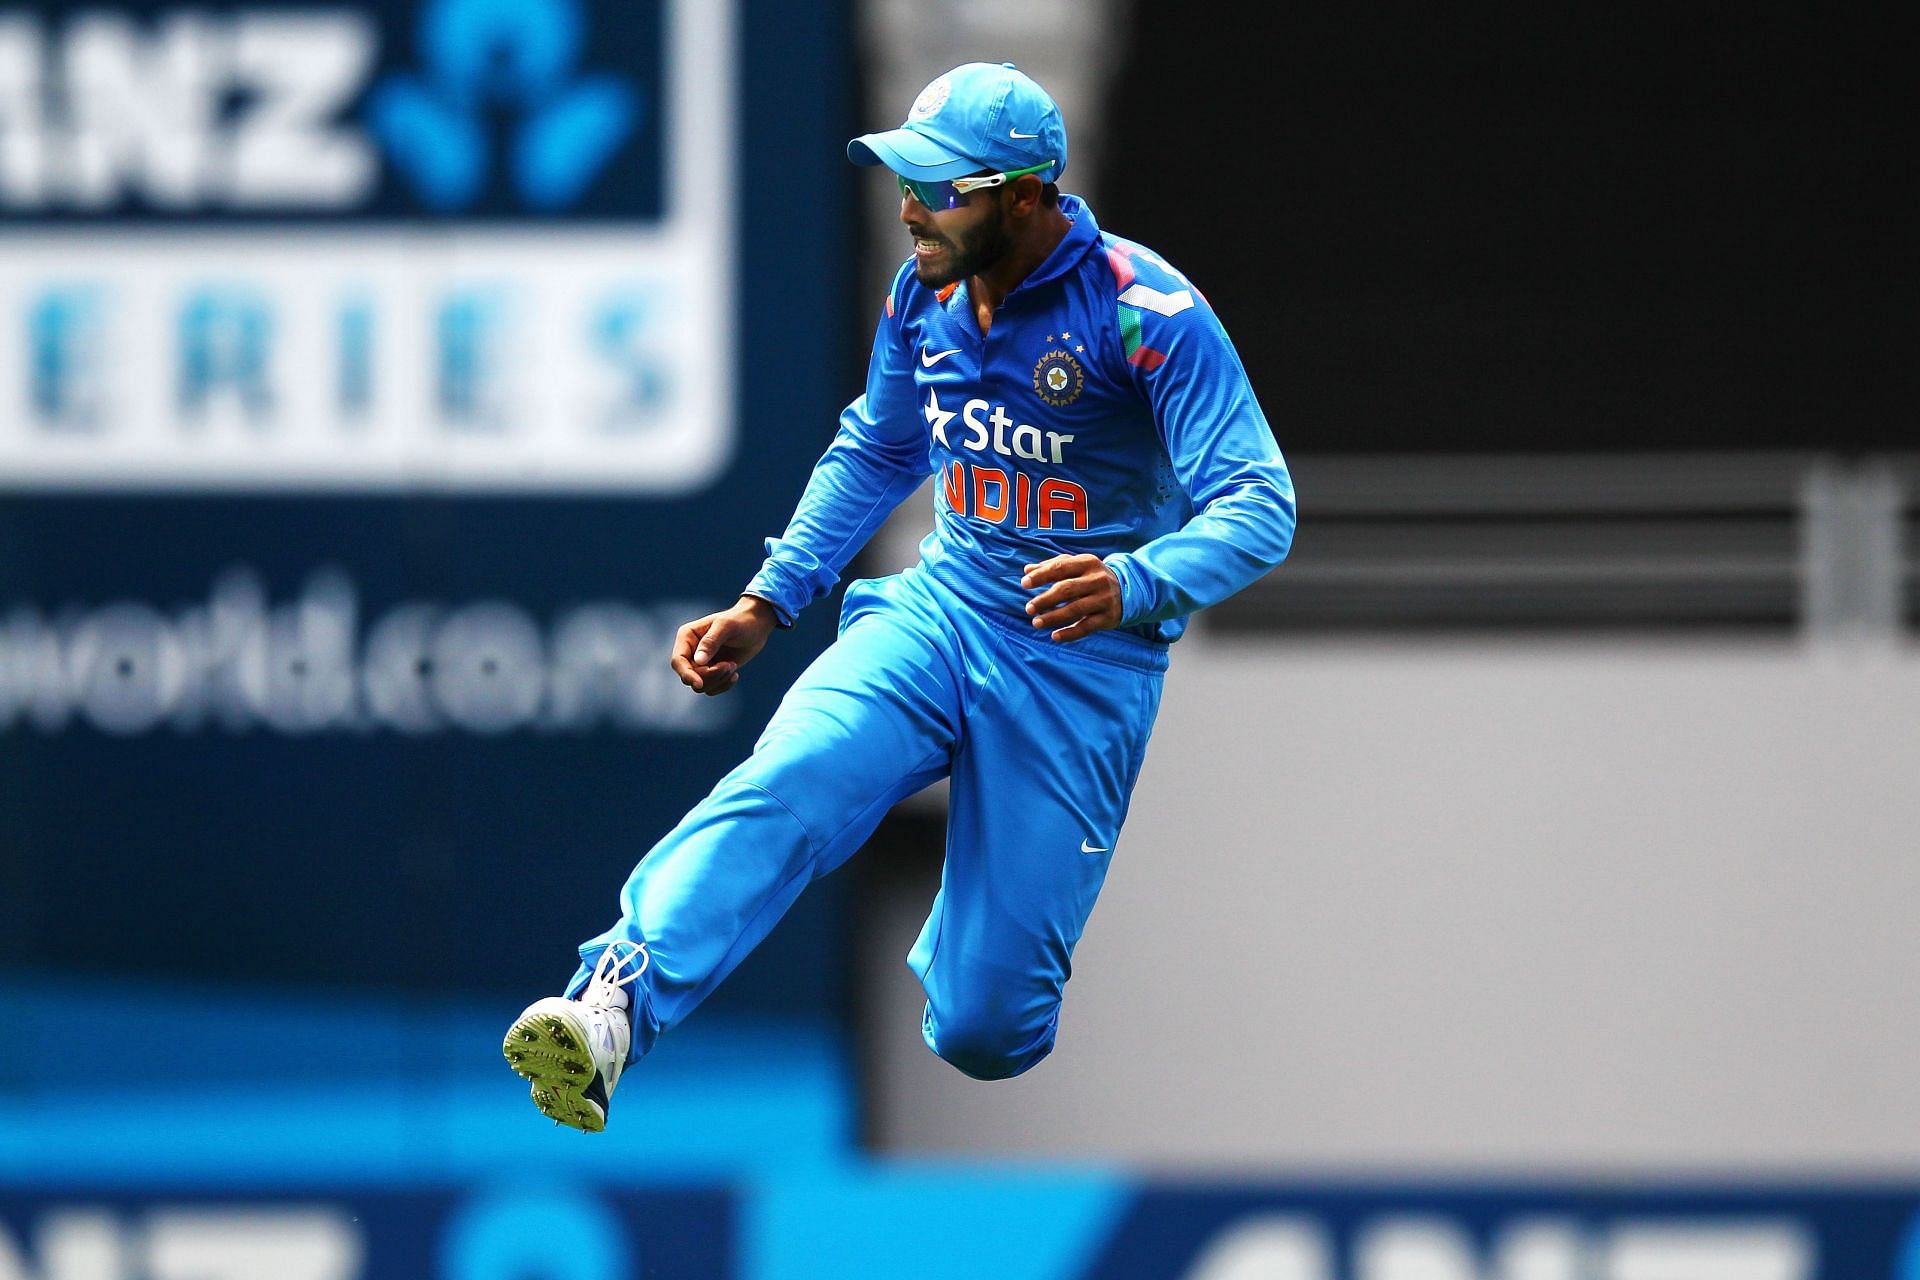 Ravindra Jadeja will play a crucial role for India in the T20 World Cup